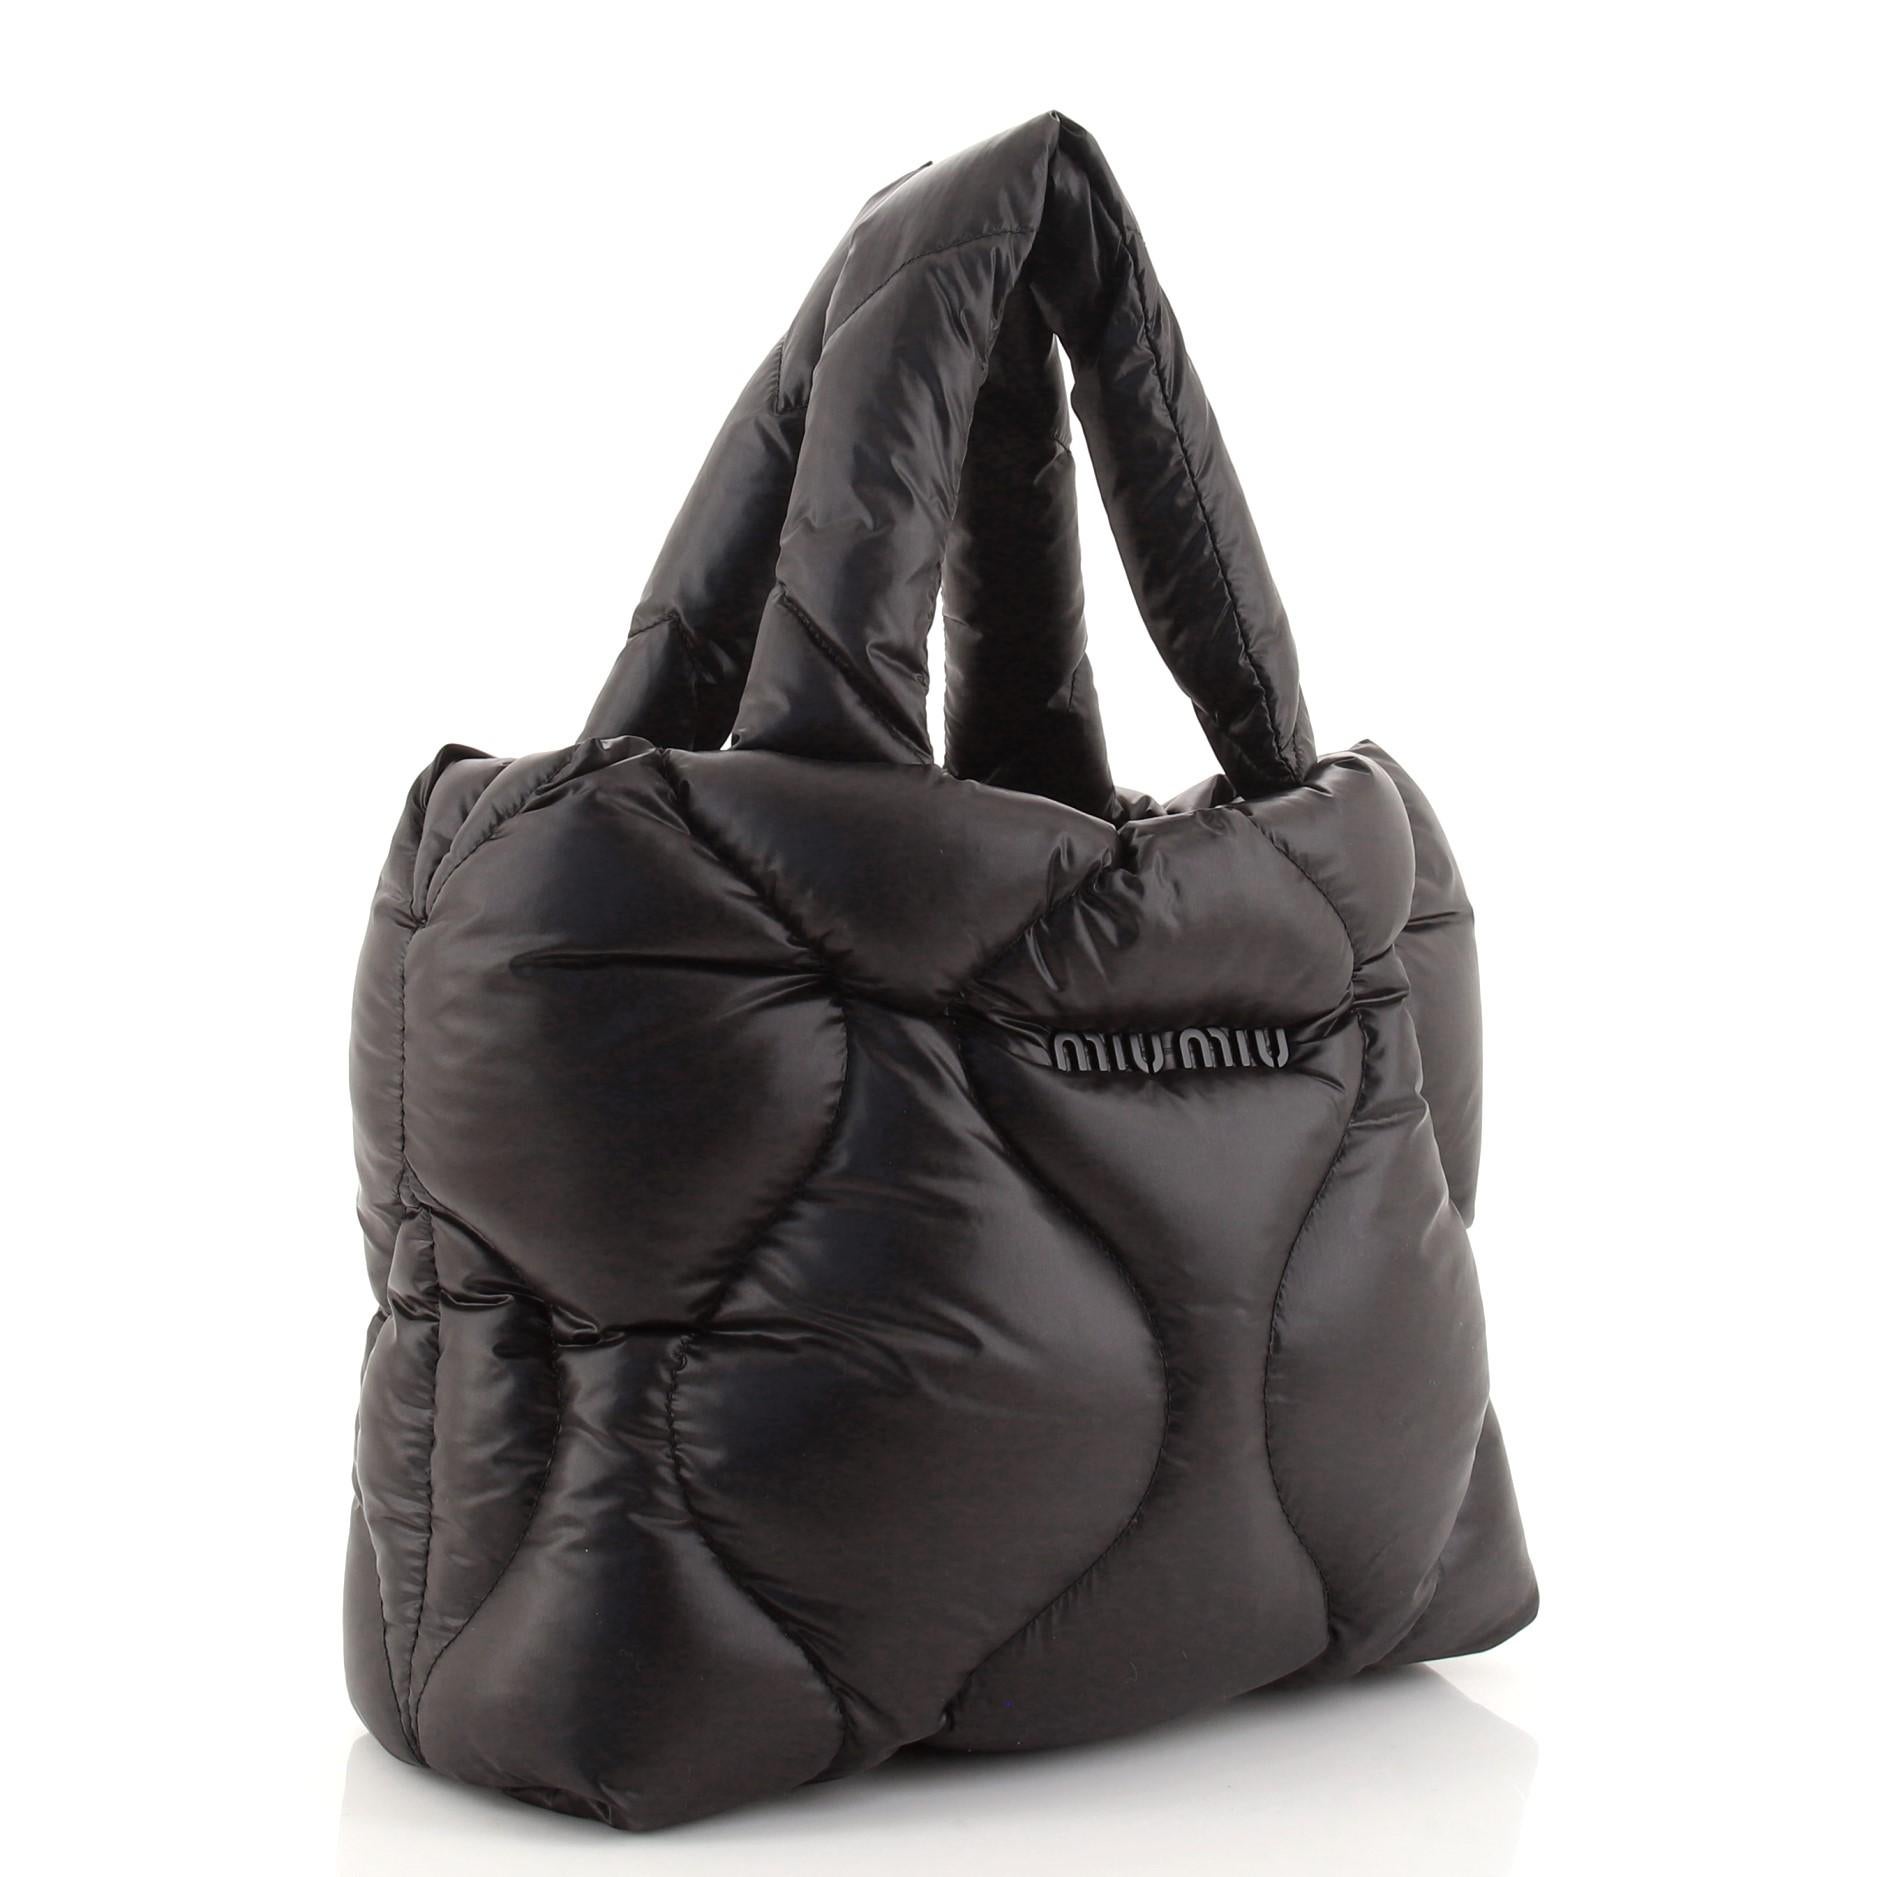 Black Miu Miu Convertible Open Tote Puffy Quilted Nylon